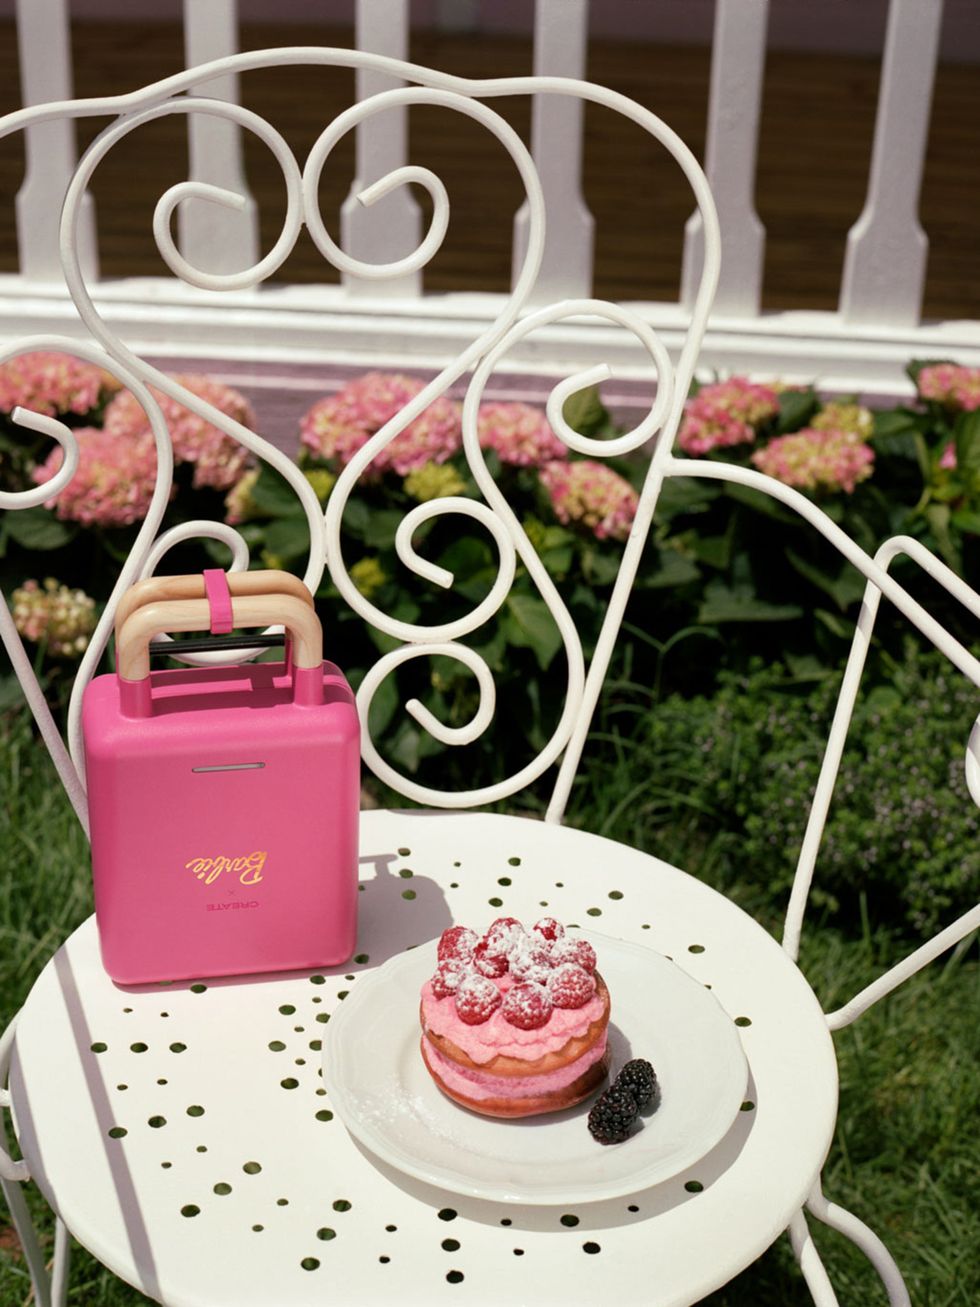 waffle maker and sandwich maker create for barbie